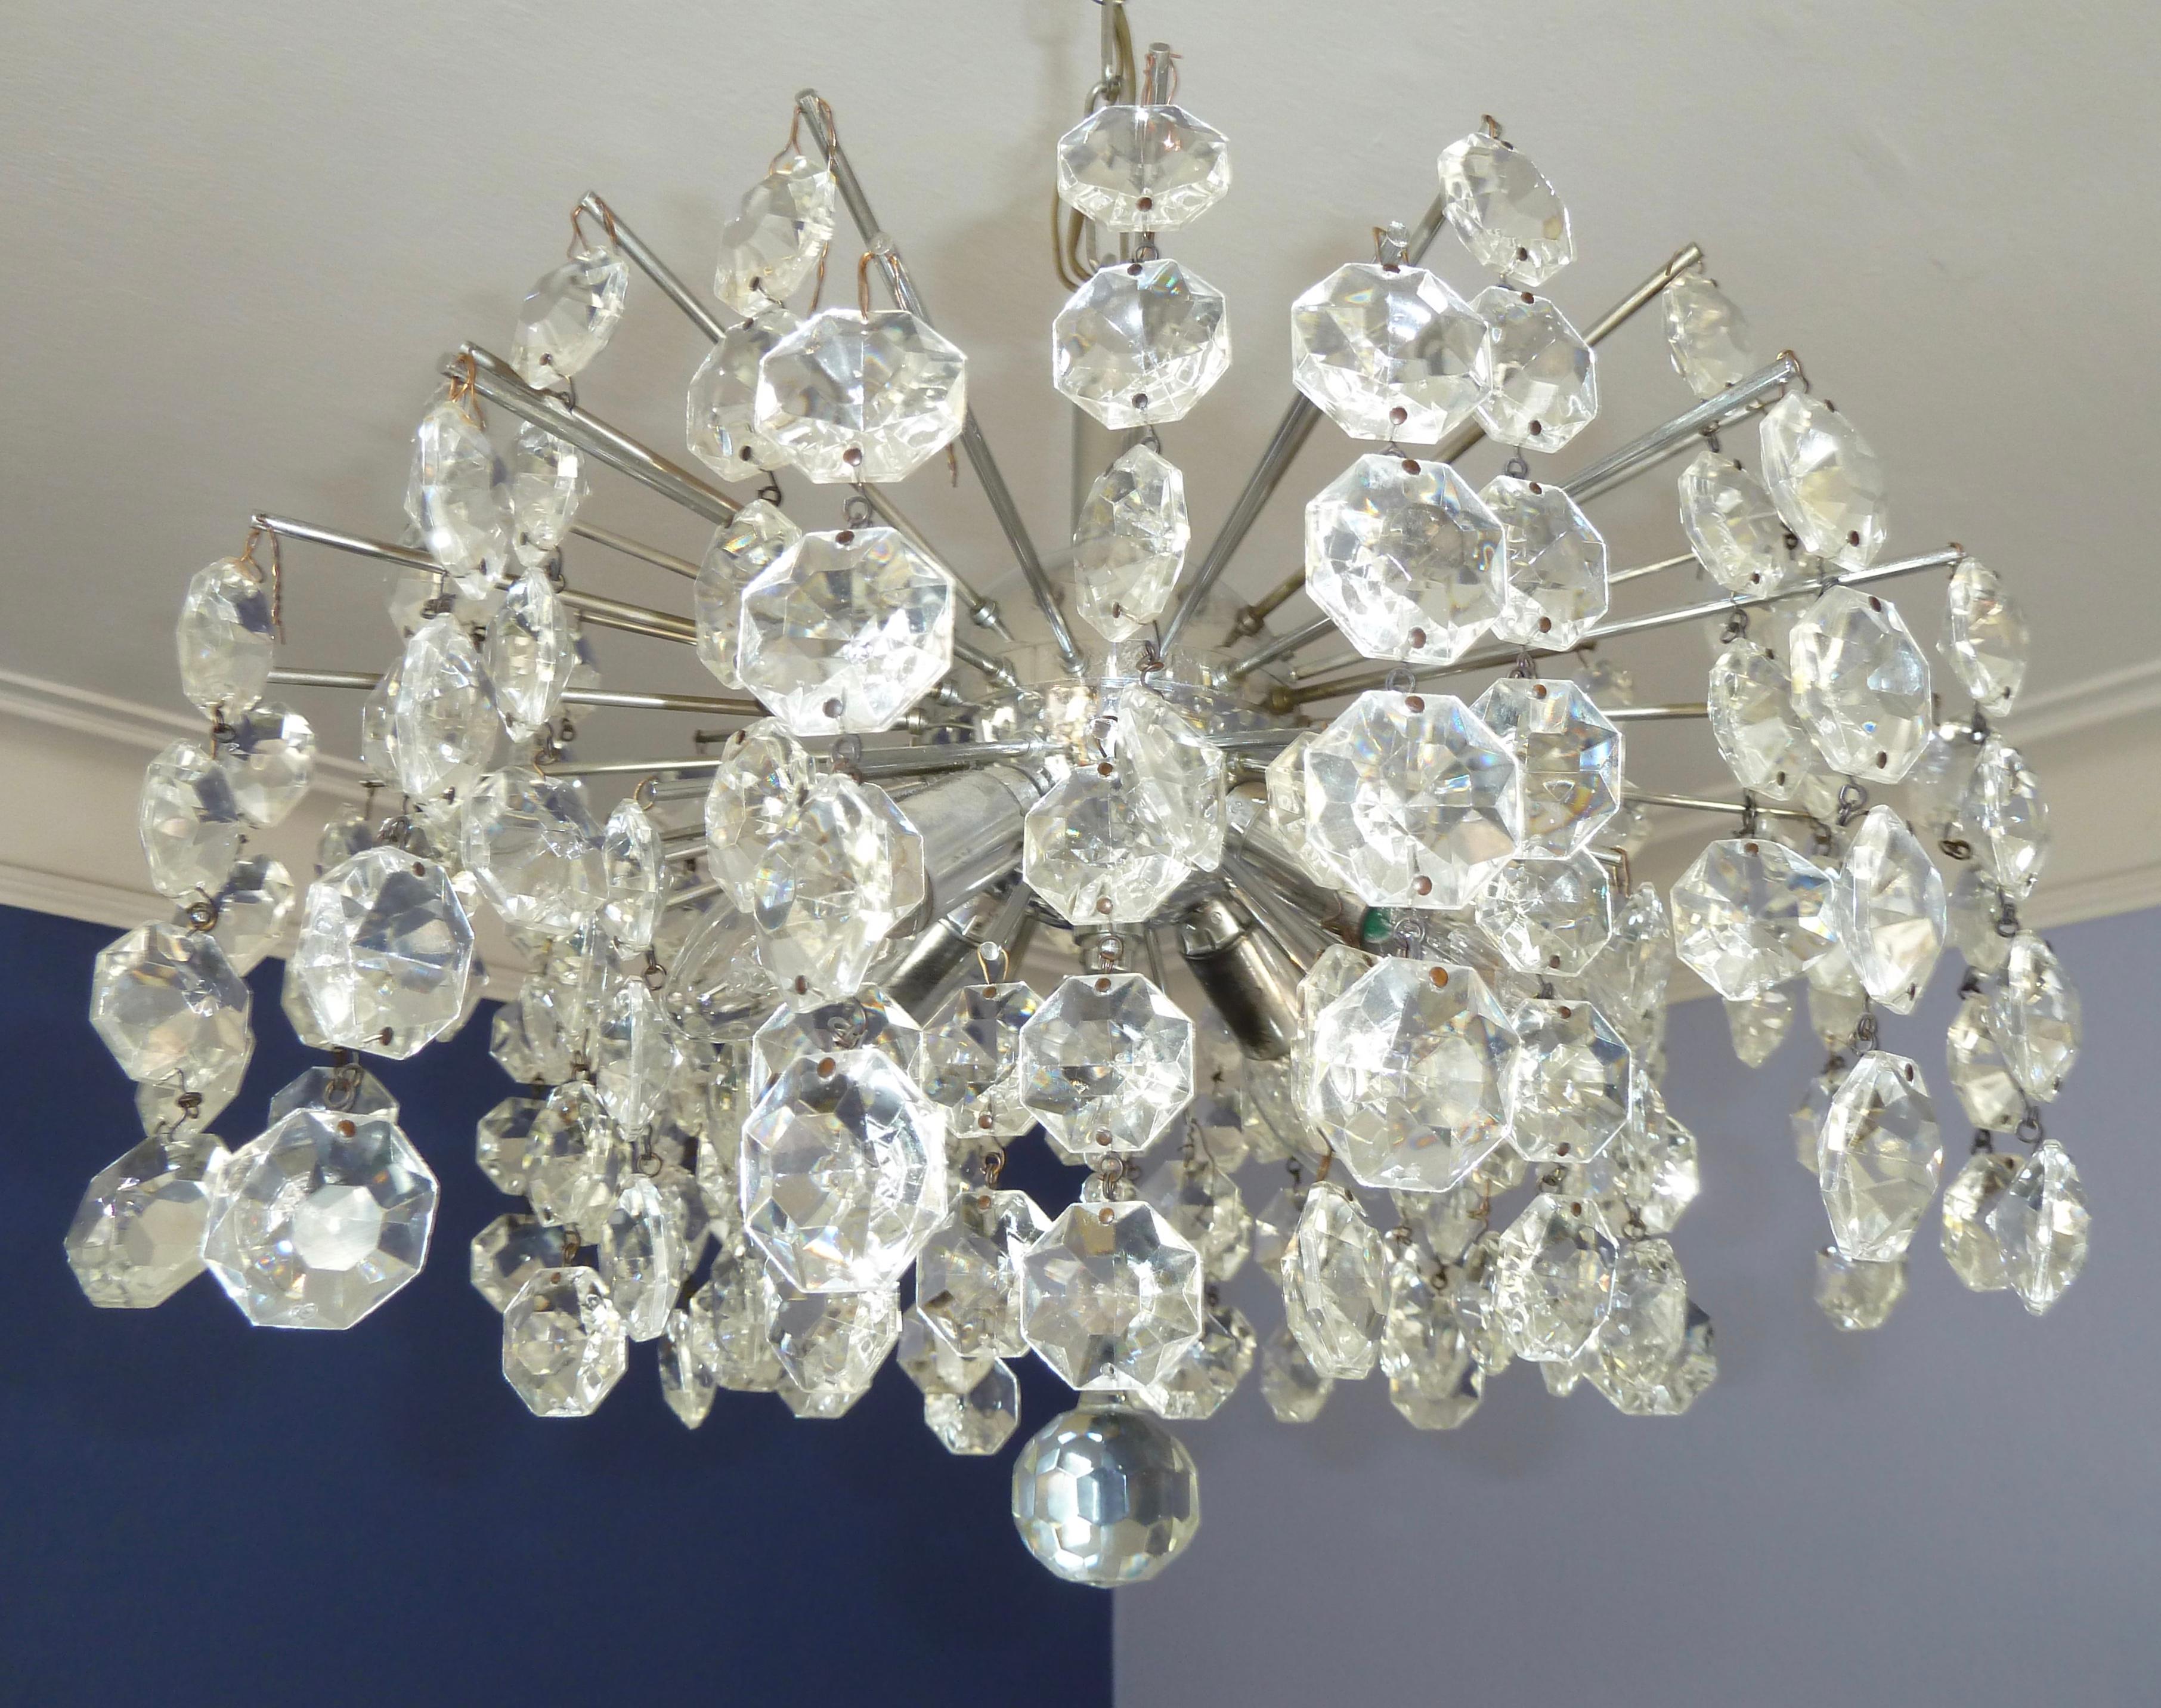 A rare version of a Sputnik or starburst chandelier from the 1970s by Bakalowits, Austria.


The fixture has 4 sockets for Edison E14 Bulbs.
The color and light intensity varies depending on bulbs, wattage.
For the pictures we used clear bulbs